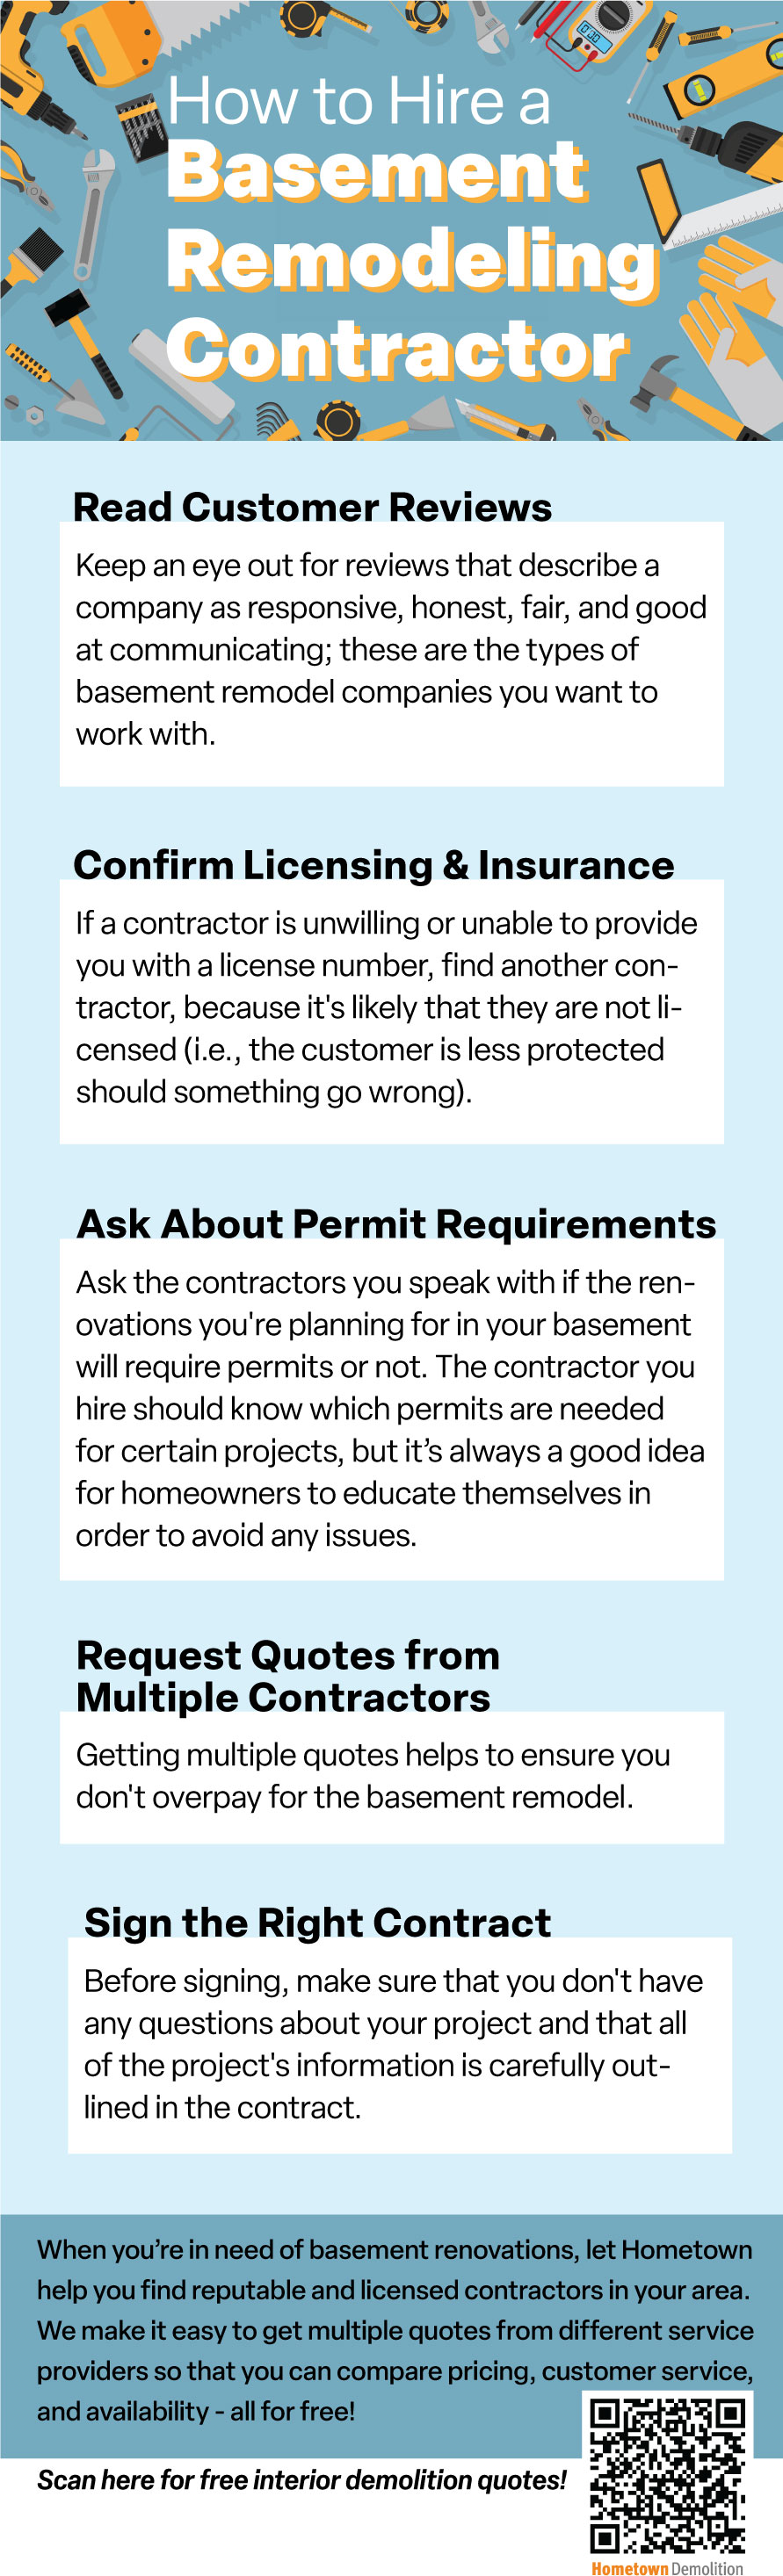 How to Hire a Basement Remodeling Contractor Infographic